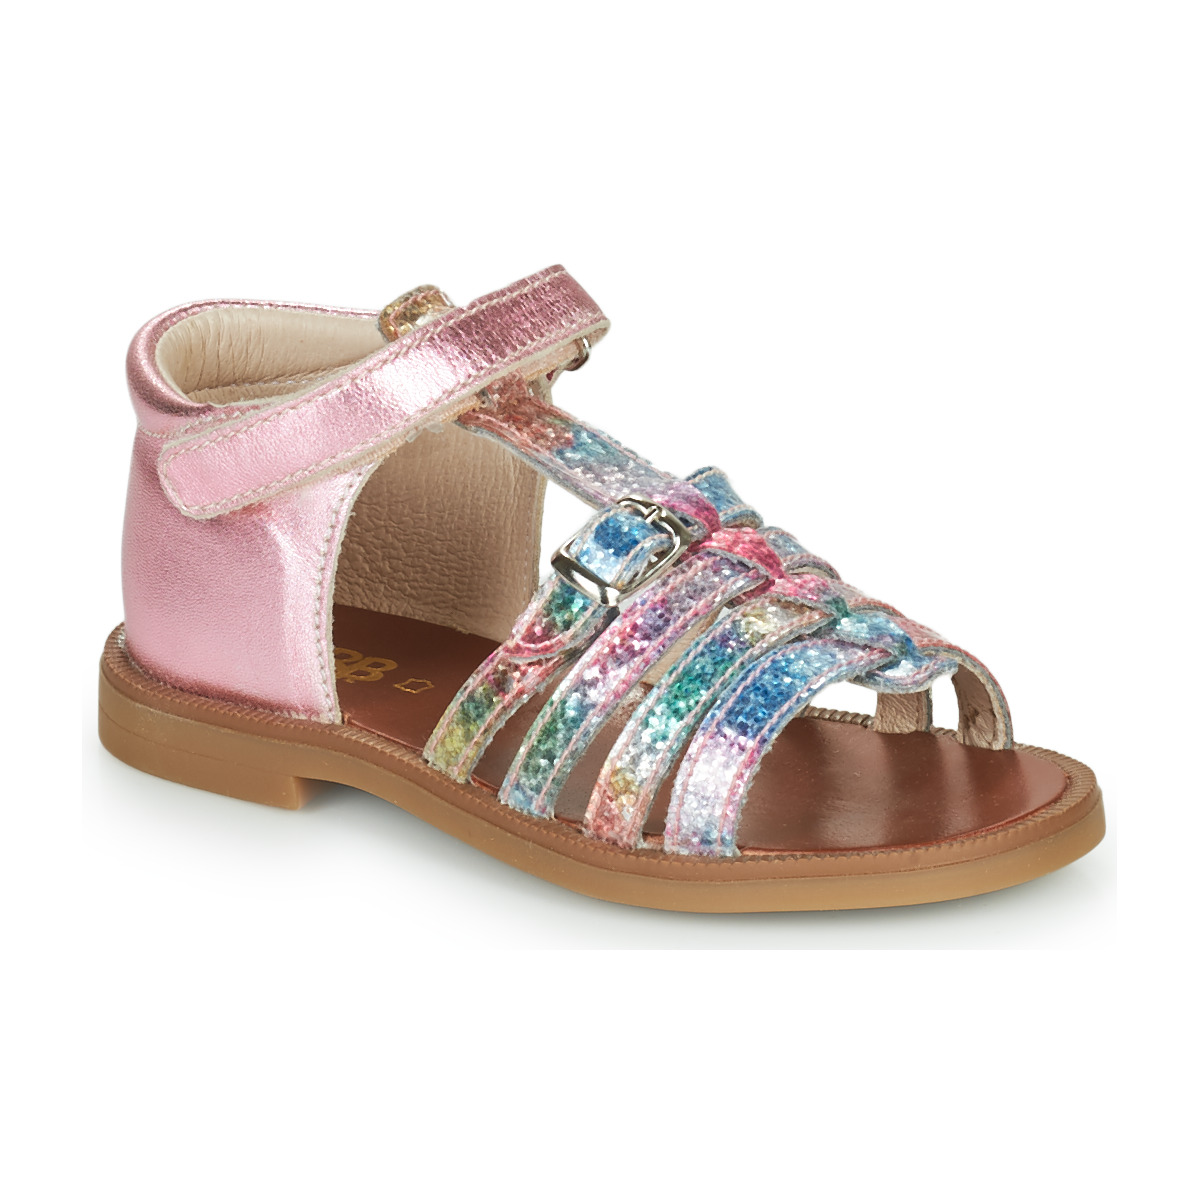 Shoes Girl Sandals GBB PHILIPPINE Pink